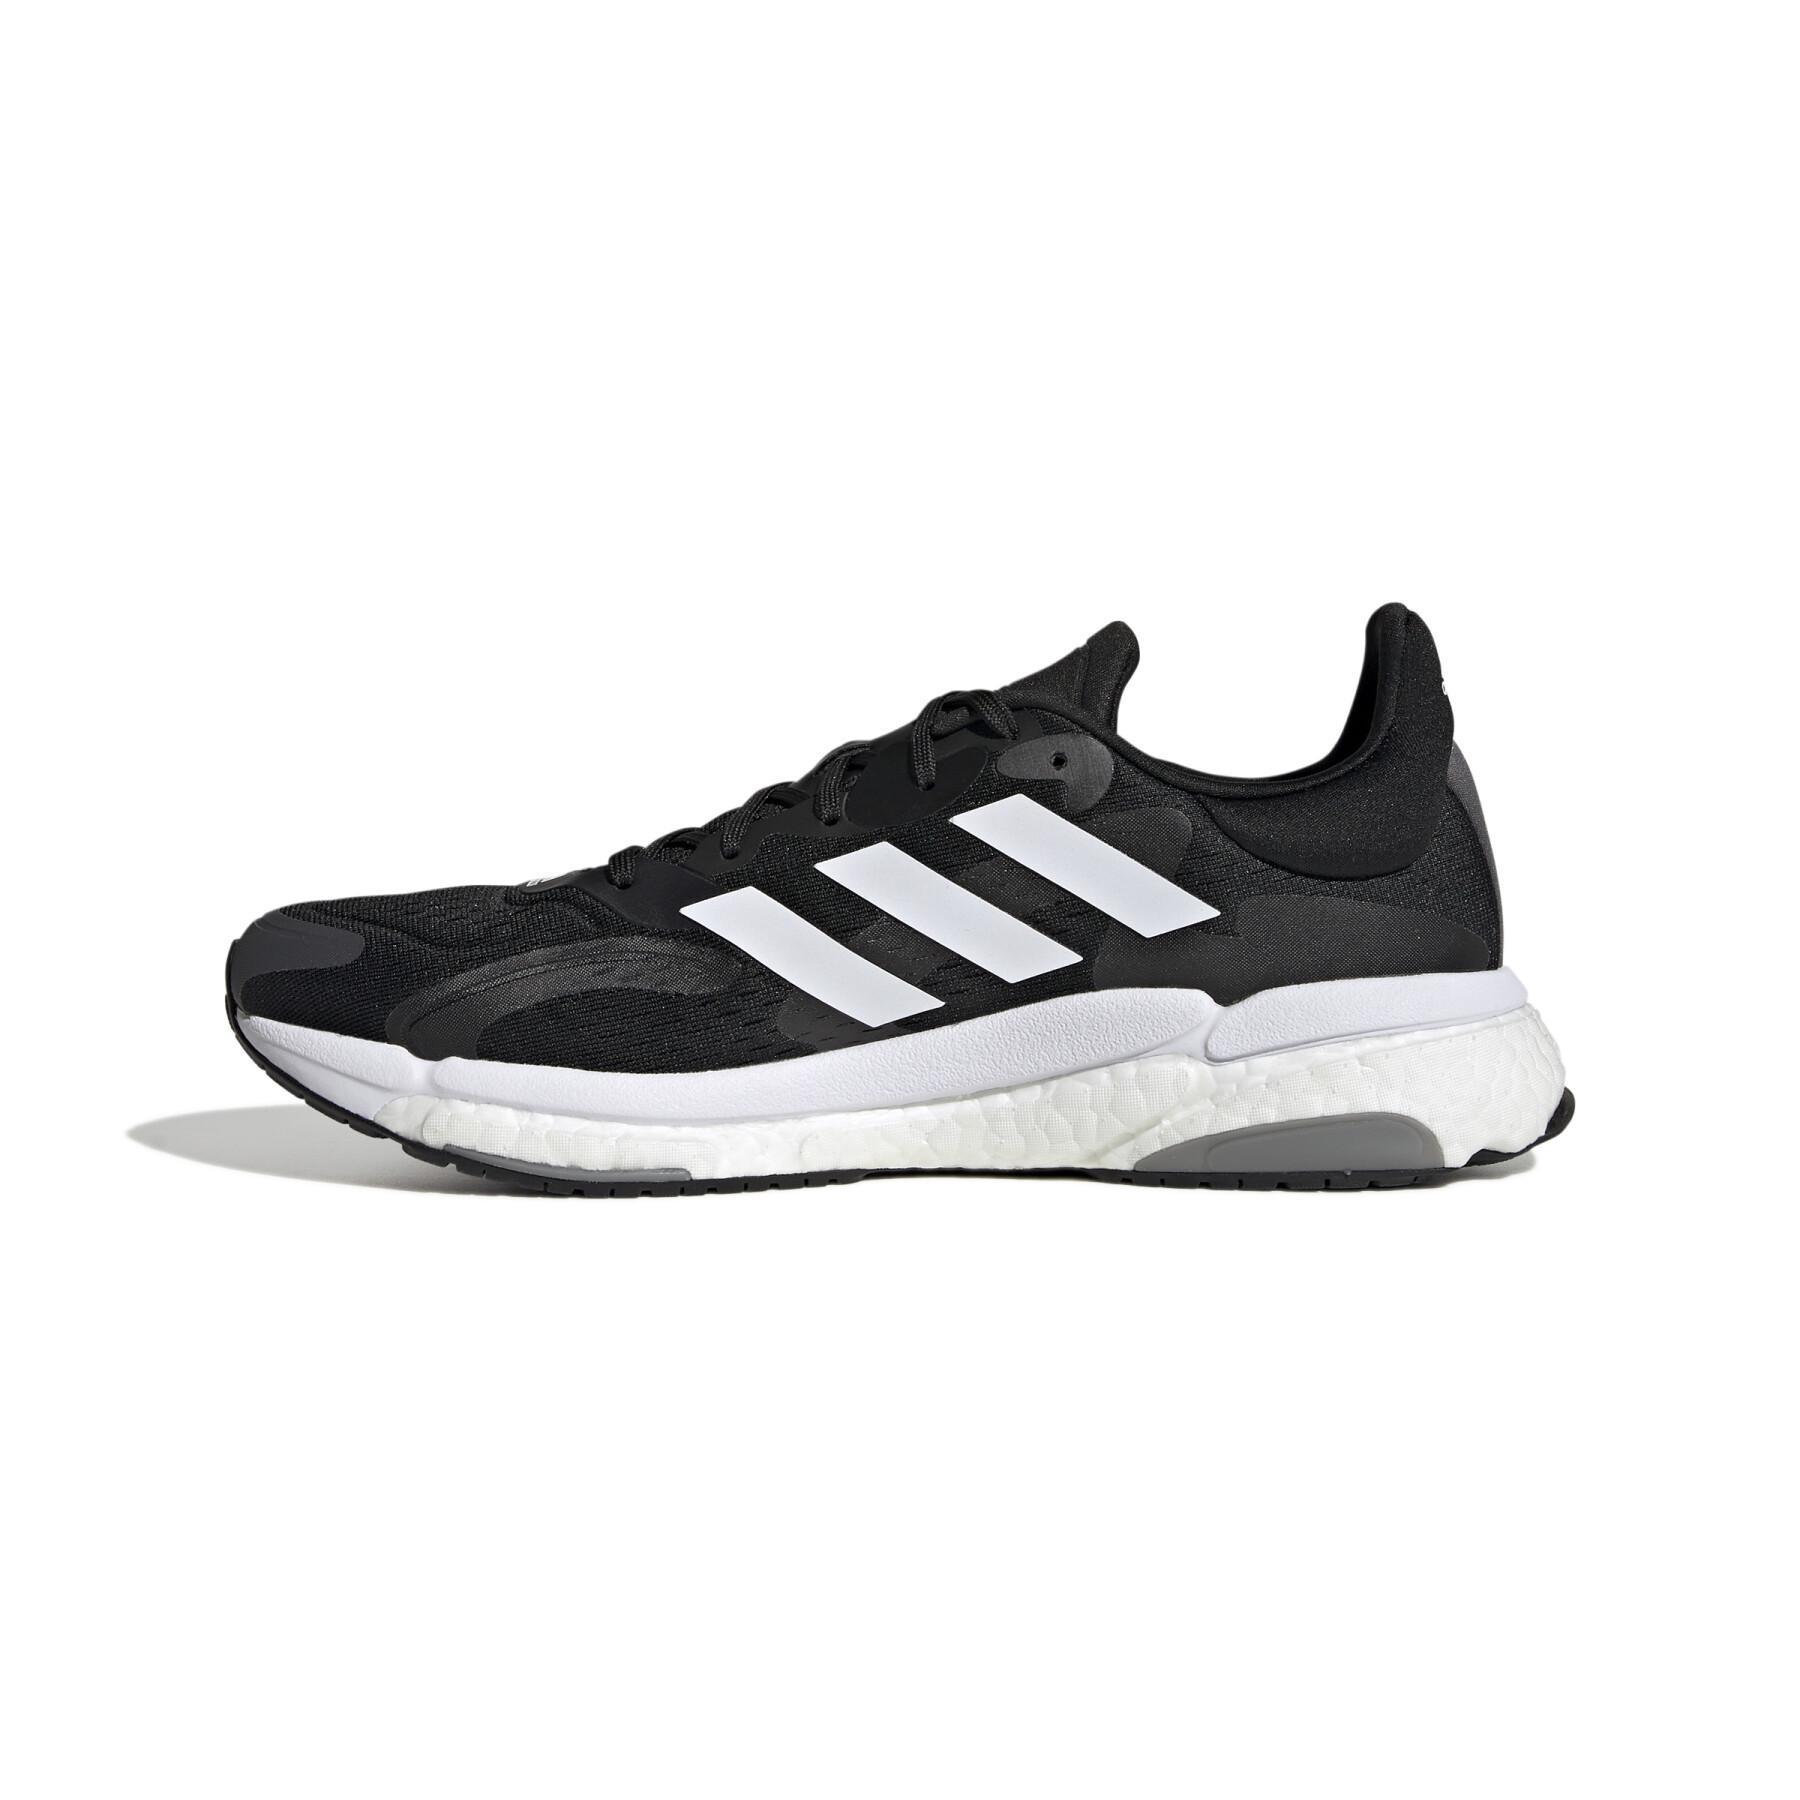 Shoes from running adidas Solarboost 4